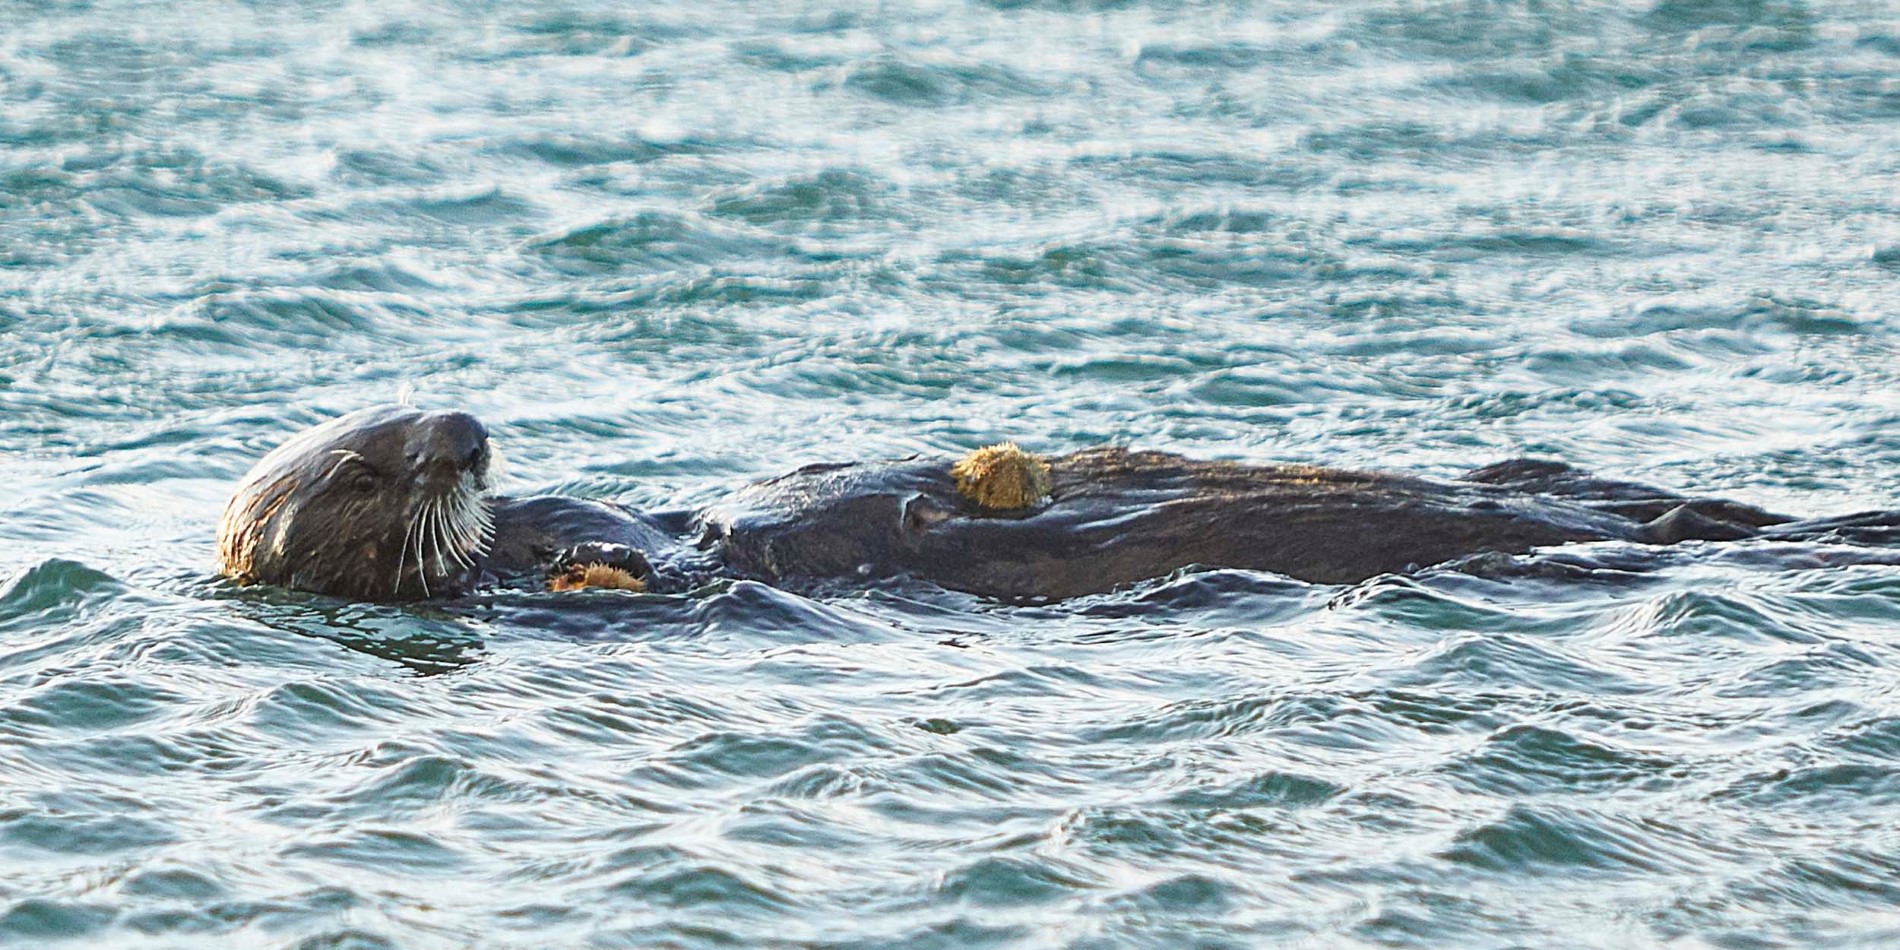 Sea otters frequent local waters.